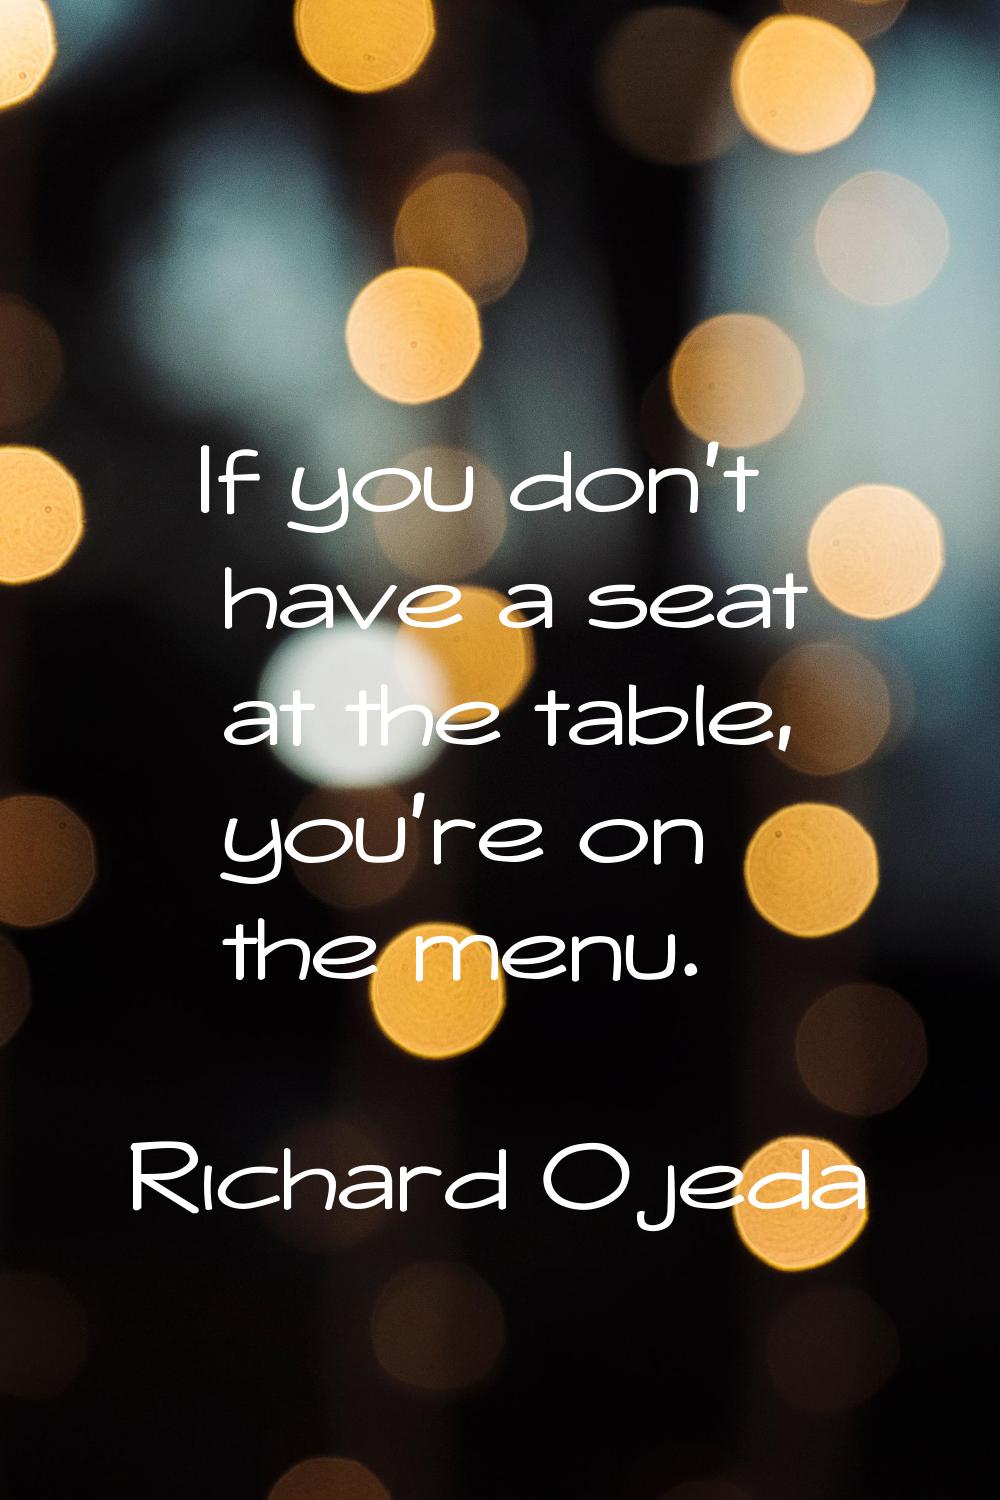 If you don't have a seat at the table, you're on the menu.